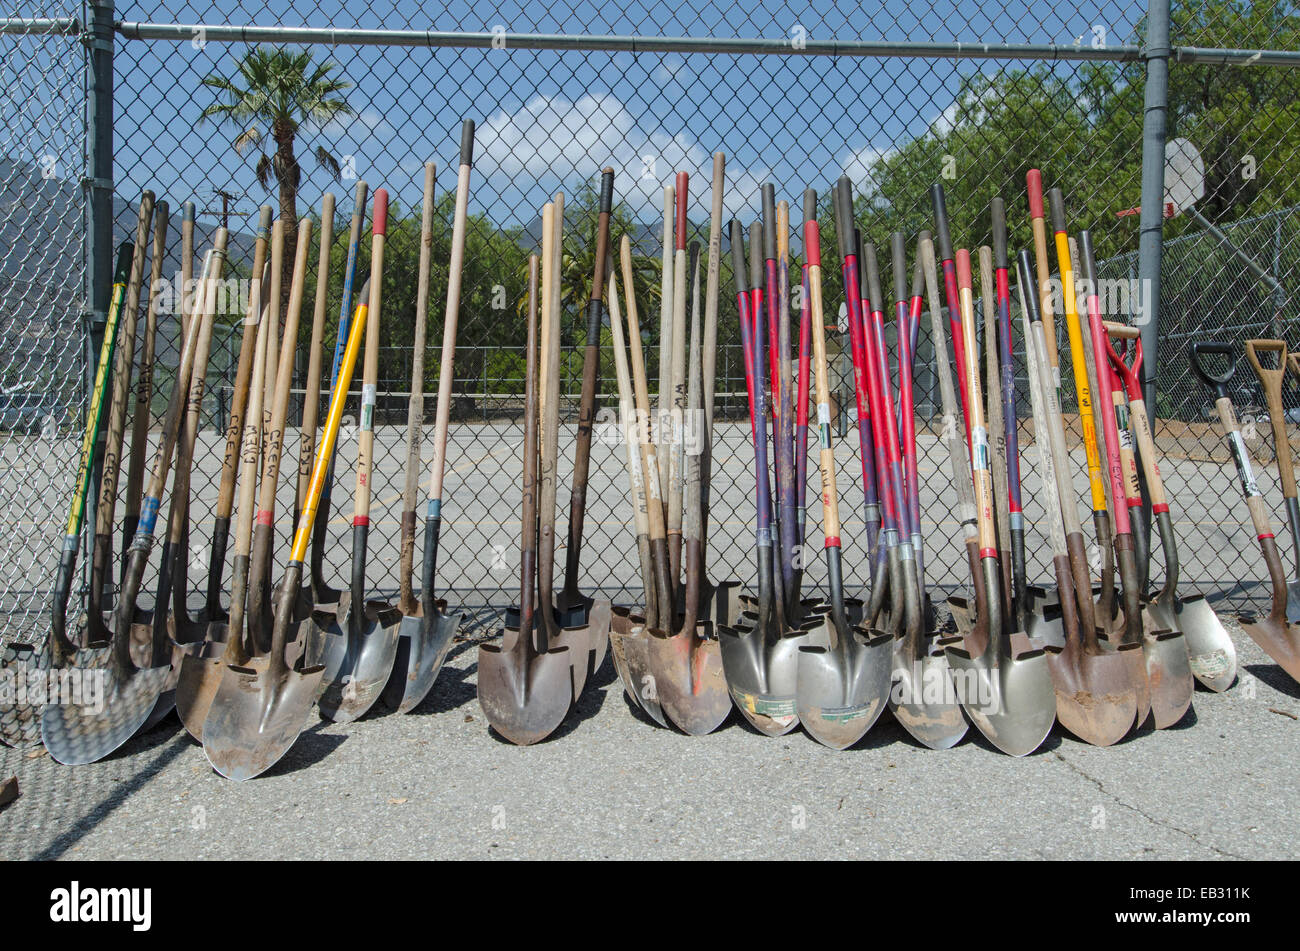 Shovels lined up for a garden volunteer day at San Antonio Elementary School in Ojai, California. Stock Photo